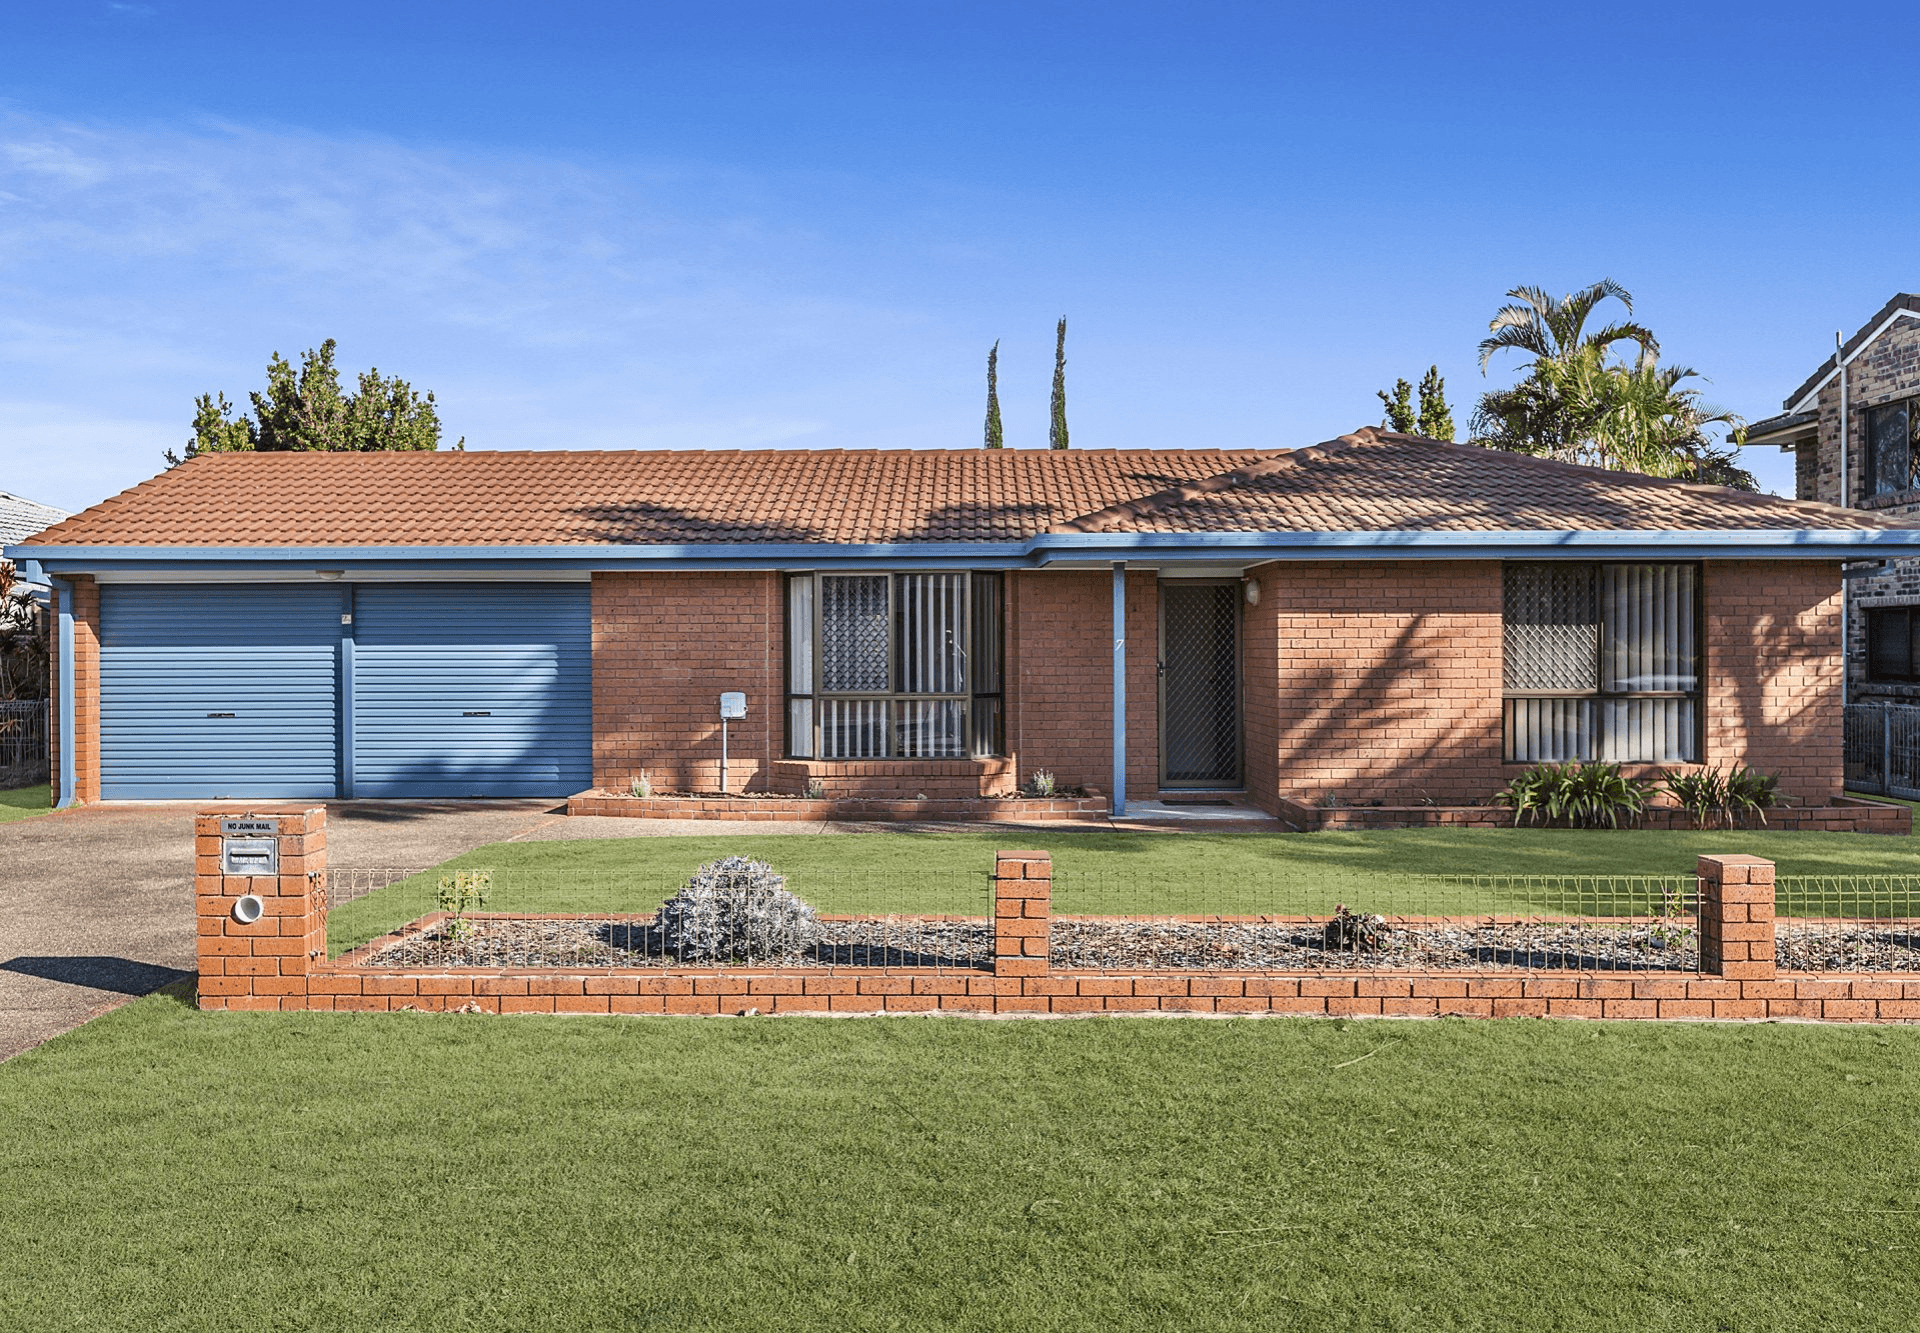 7-9 Clearwater Street, Ormiston, QLD 4160